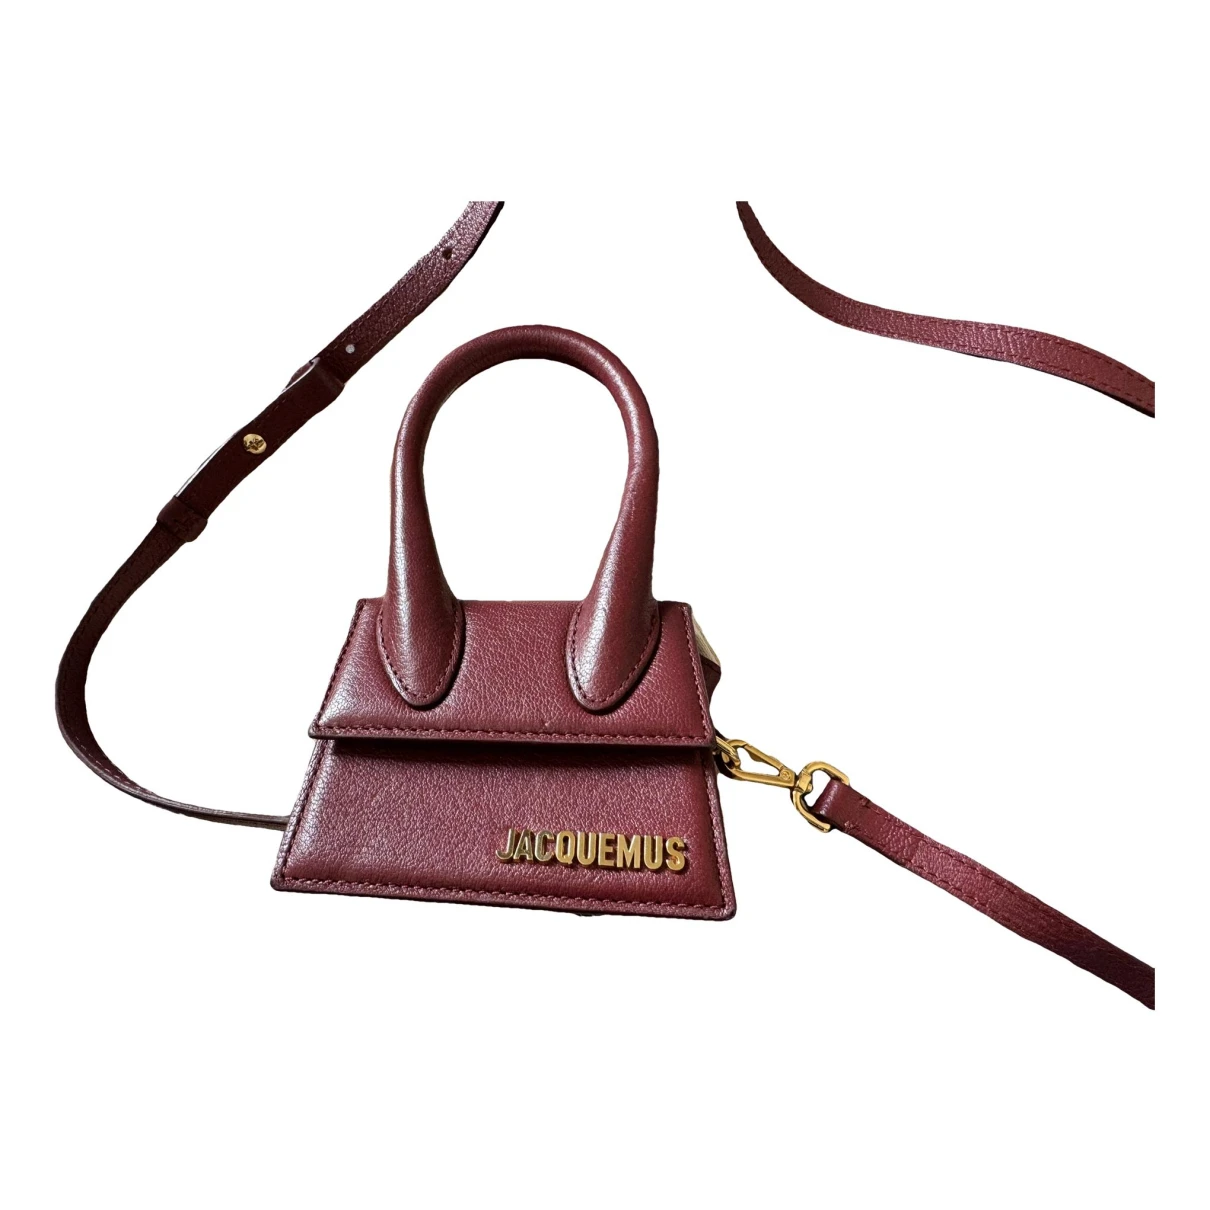 Pre-owned Jacquemus Chiquito Leather Handbag In Burgundy